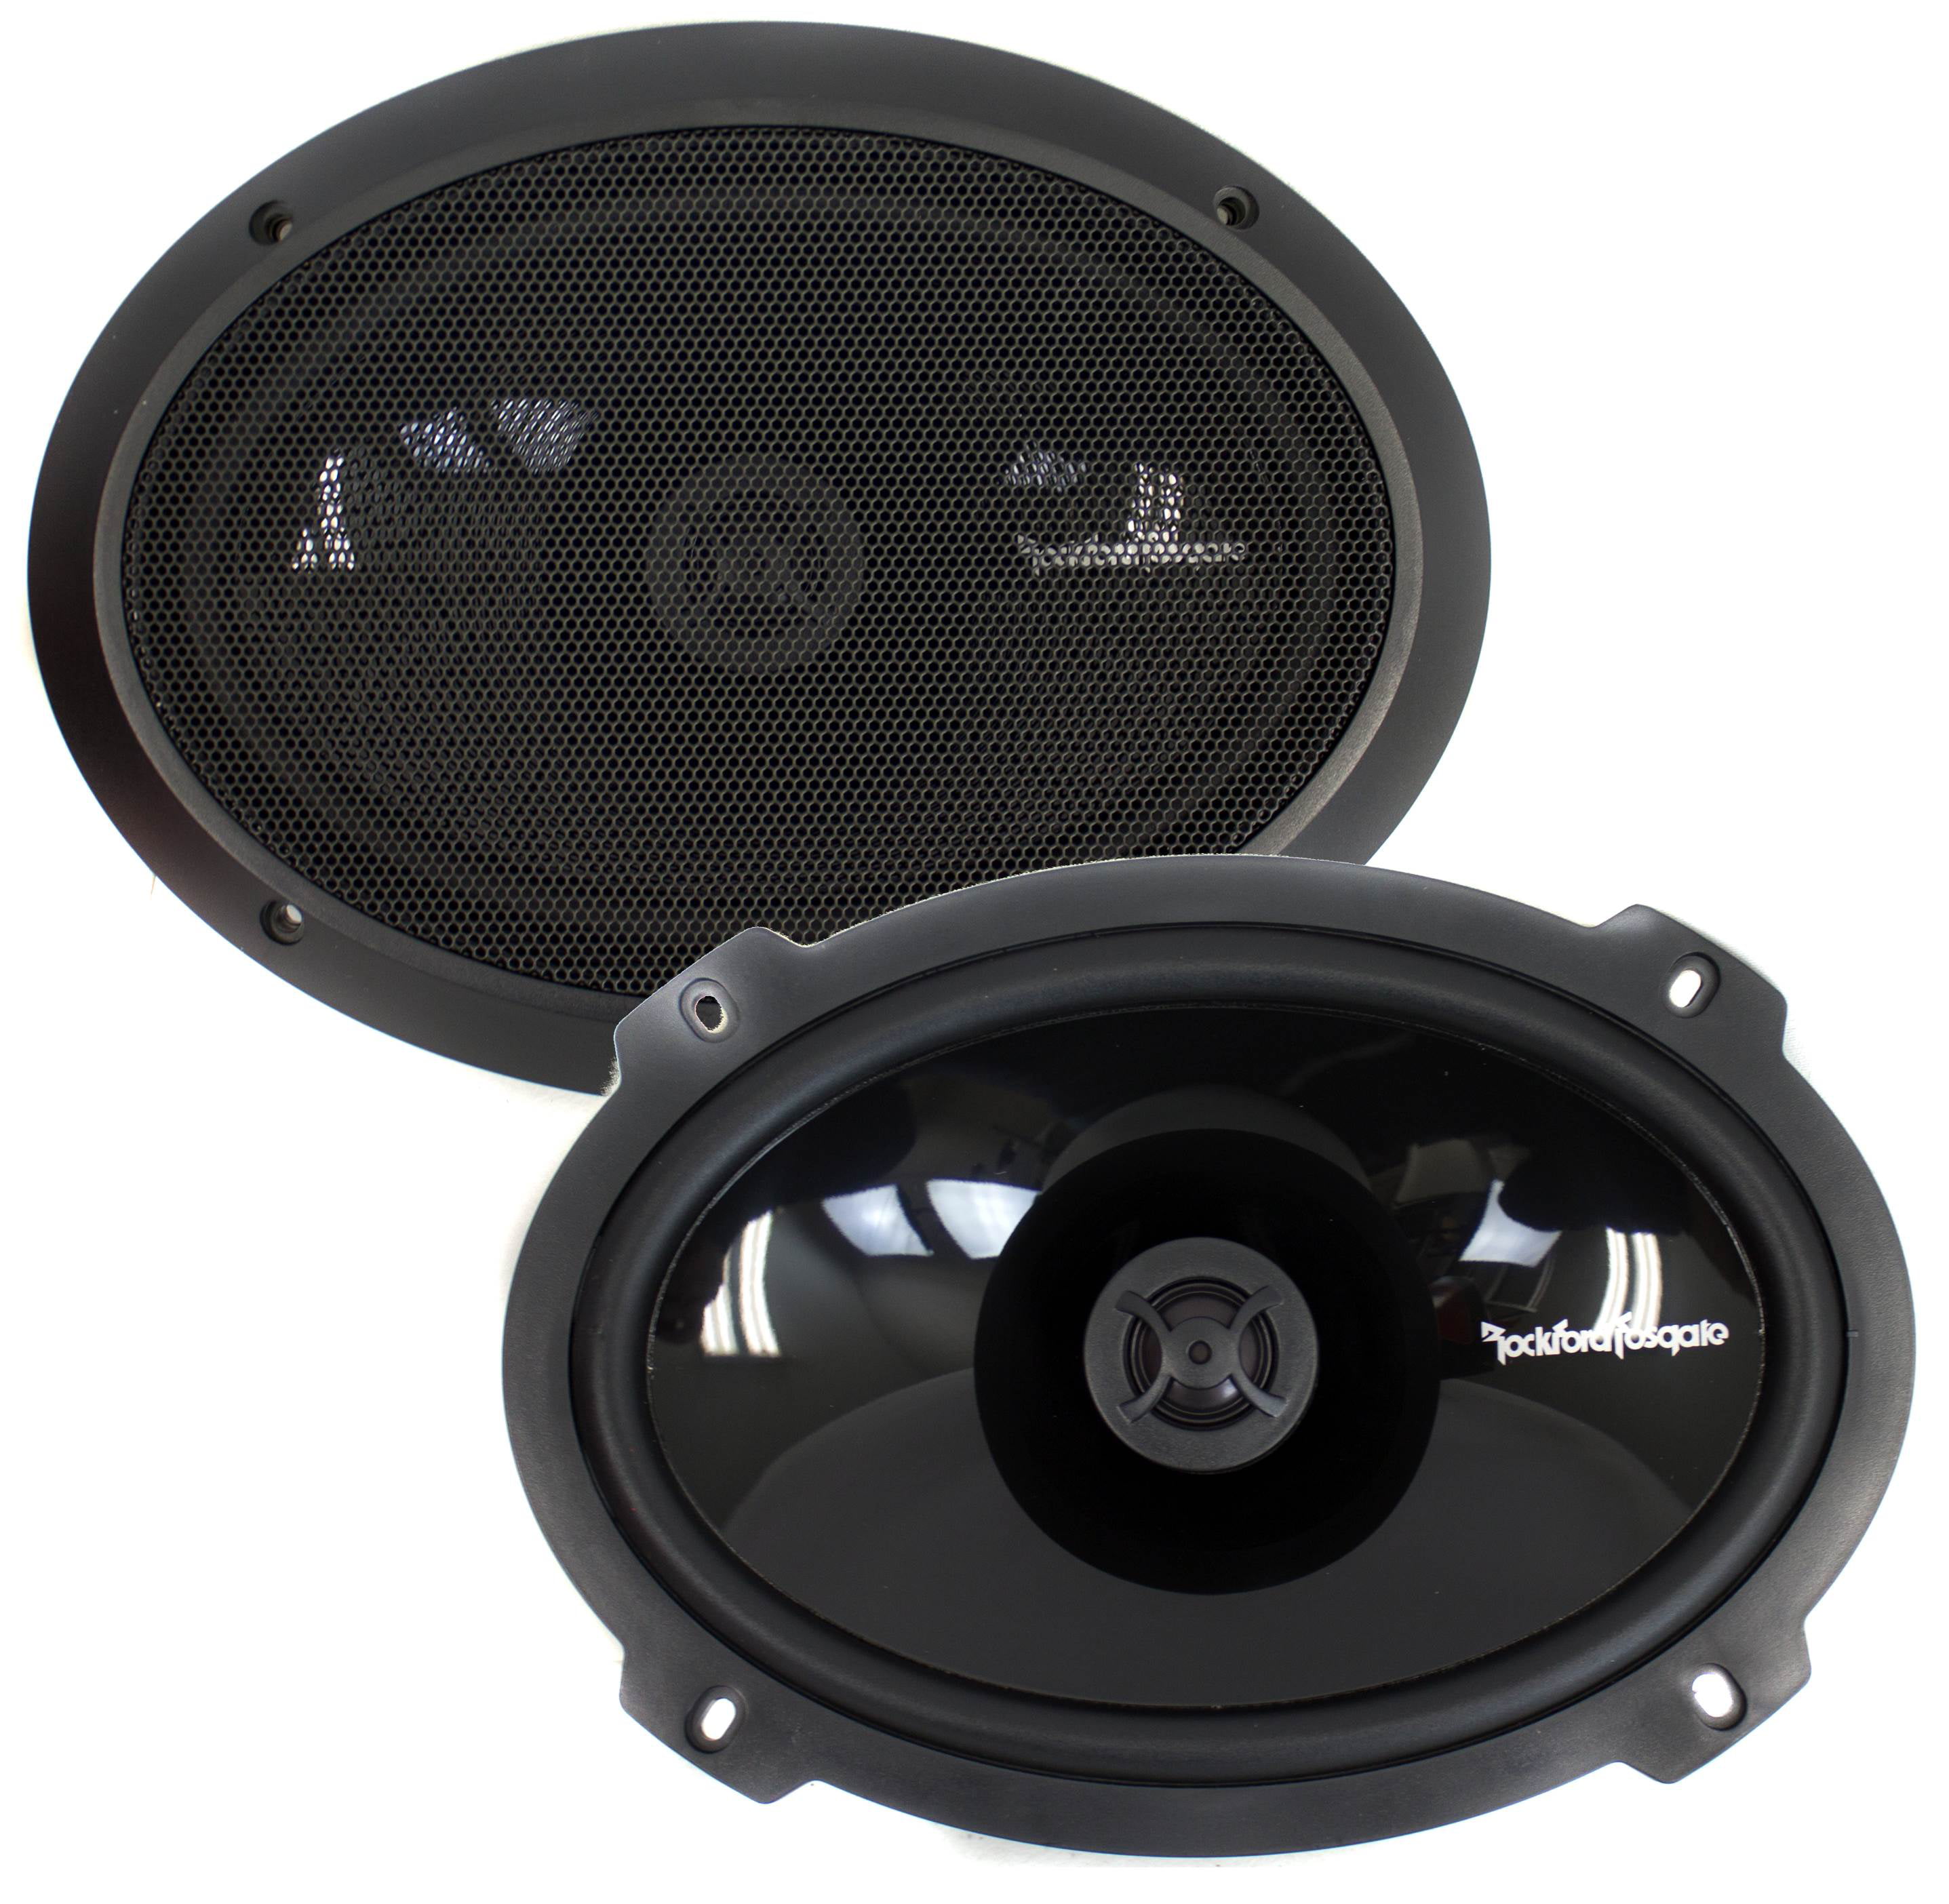 2 NEW 6 x 9" 3-way Car Speakers.Stereo Pair.Car Audio OEM replacements.6x9". 